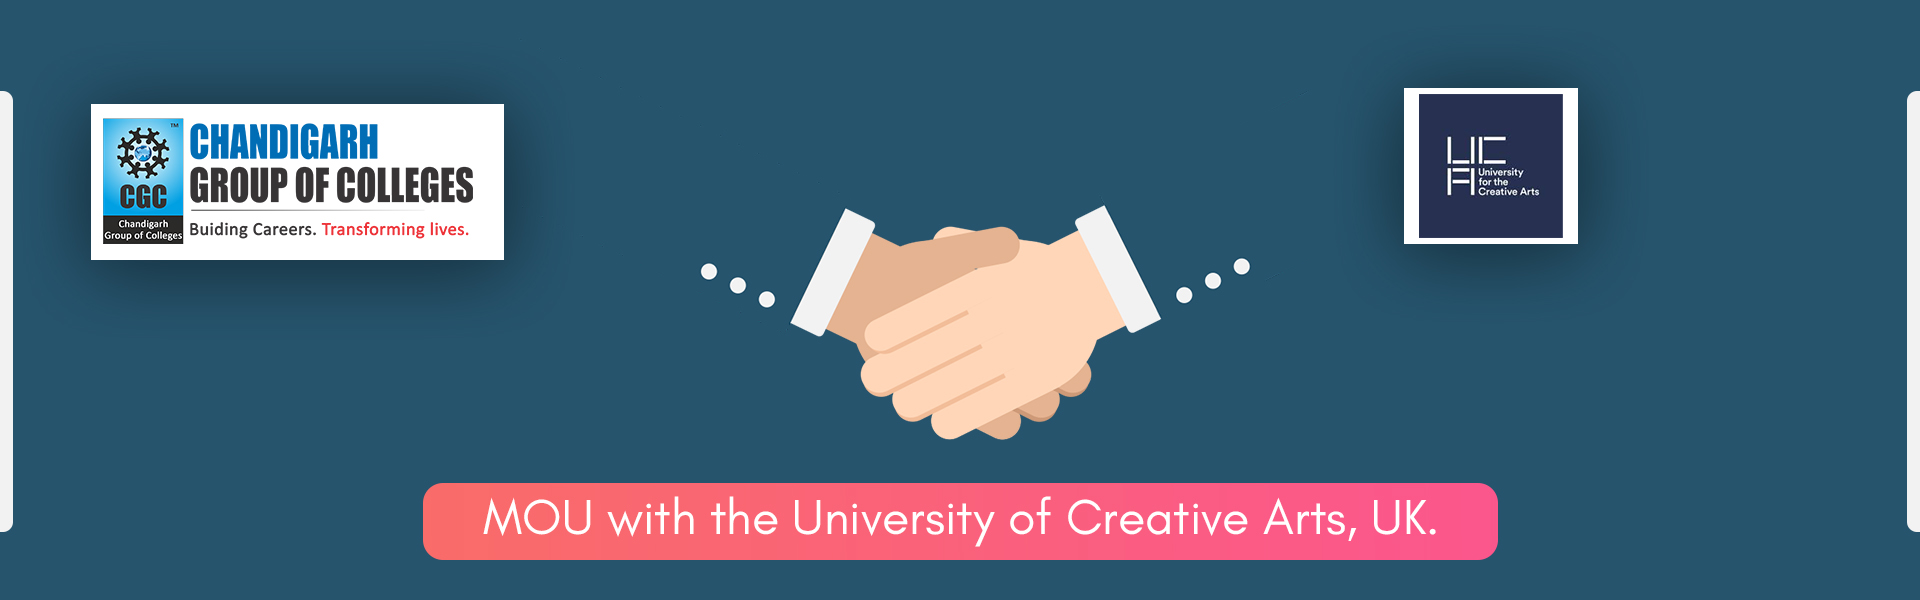 Department of international affairs, CGC Landran proudly announces having successfully signed a new MOU with the University of Creative Arts, UK. 